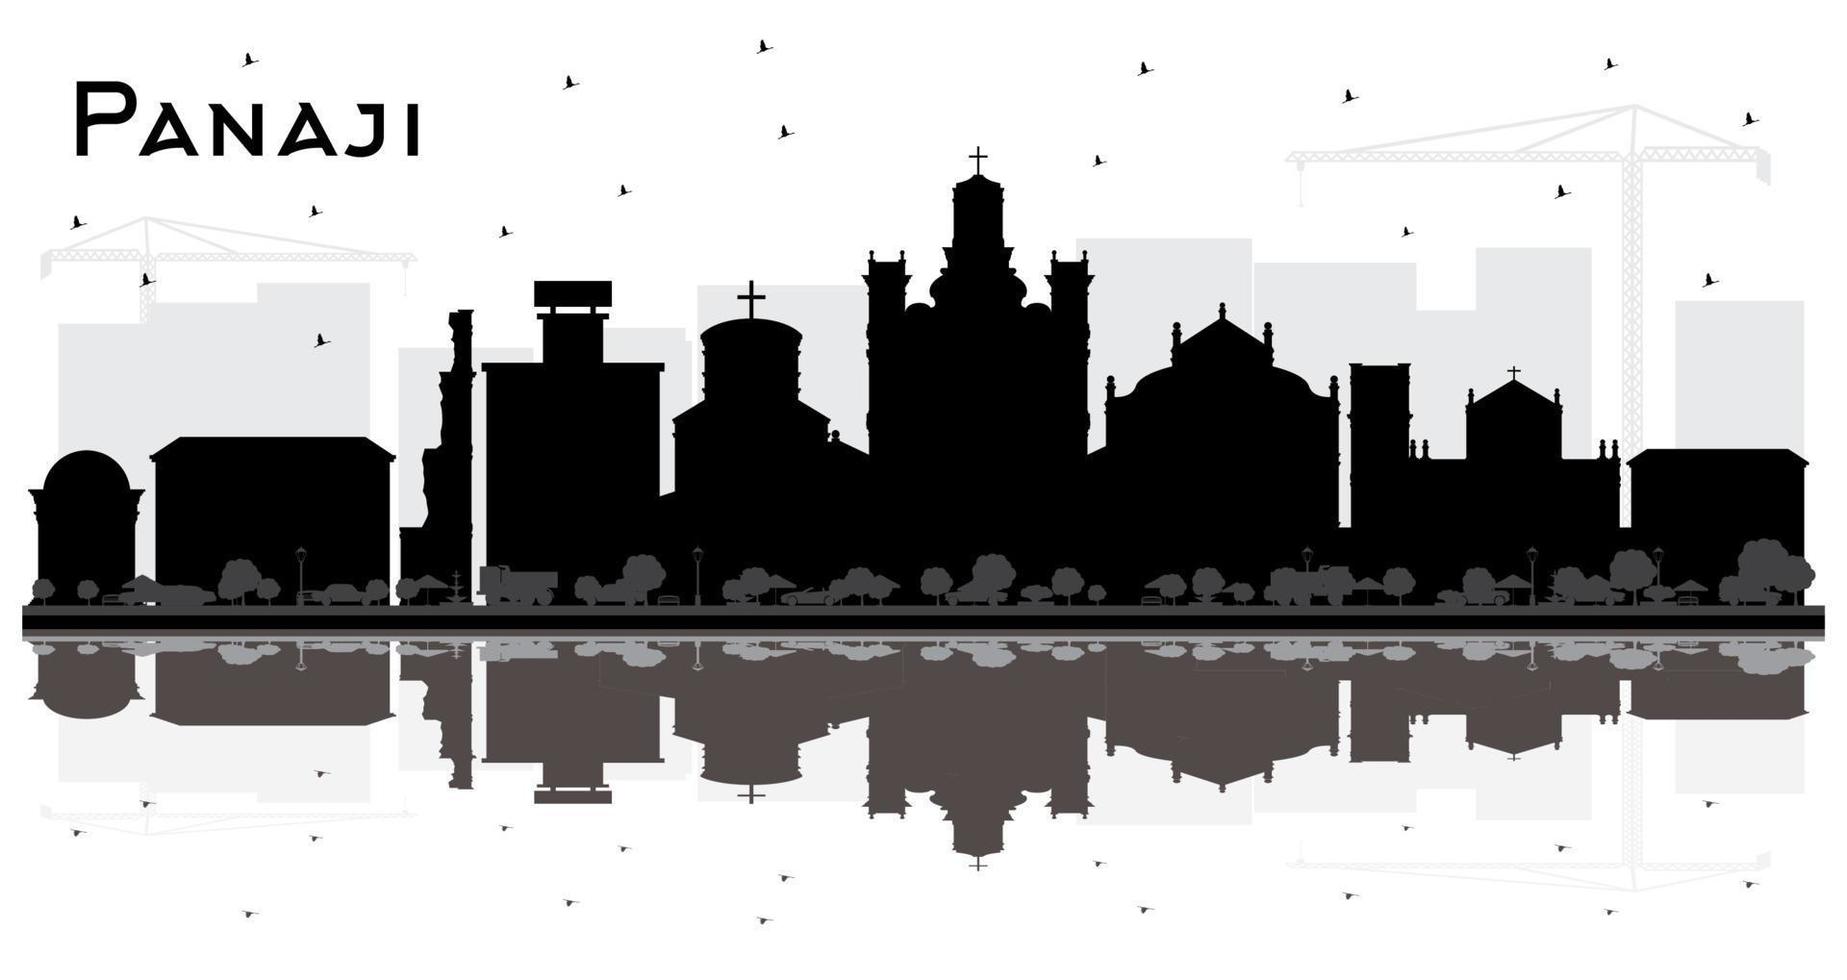 Panaji India City Skyline Silhouette with Black Buildings and Reflections Isolated on White. vector